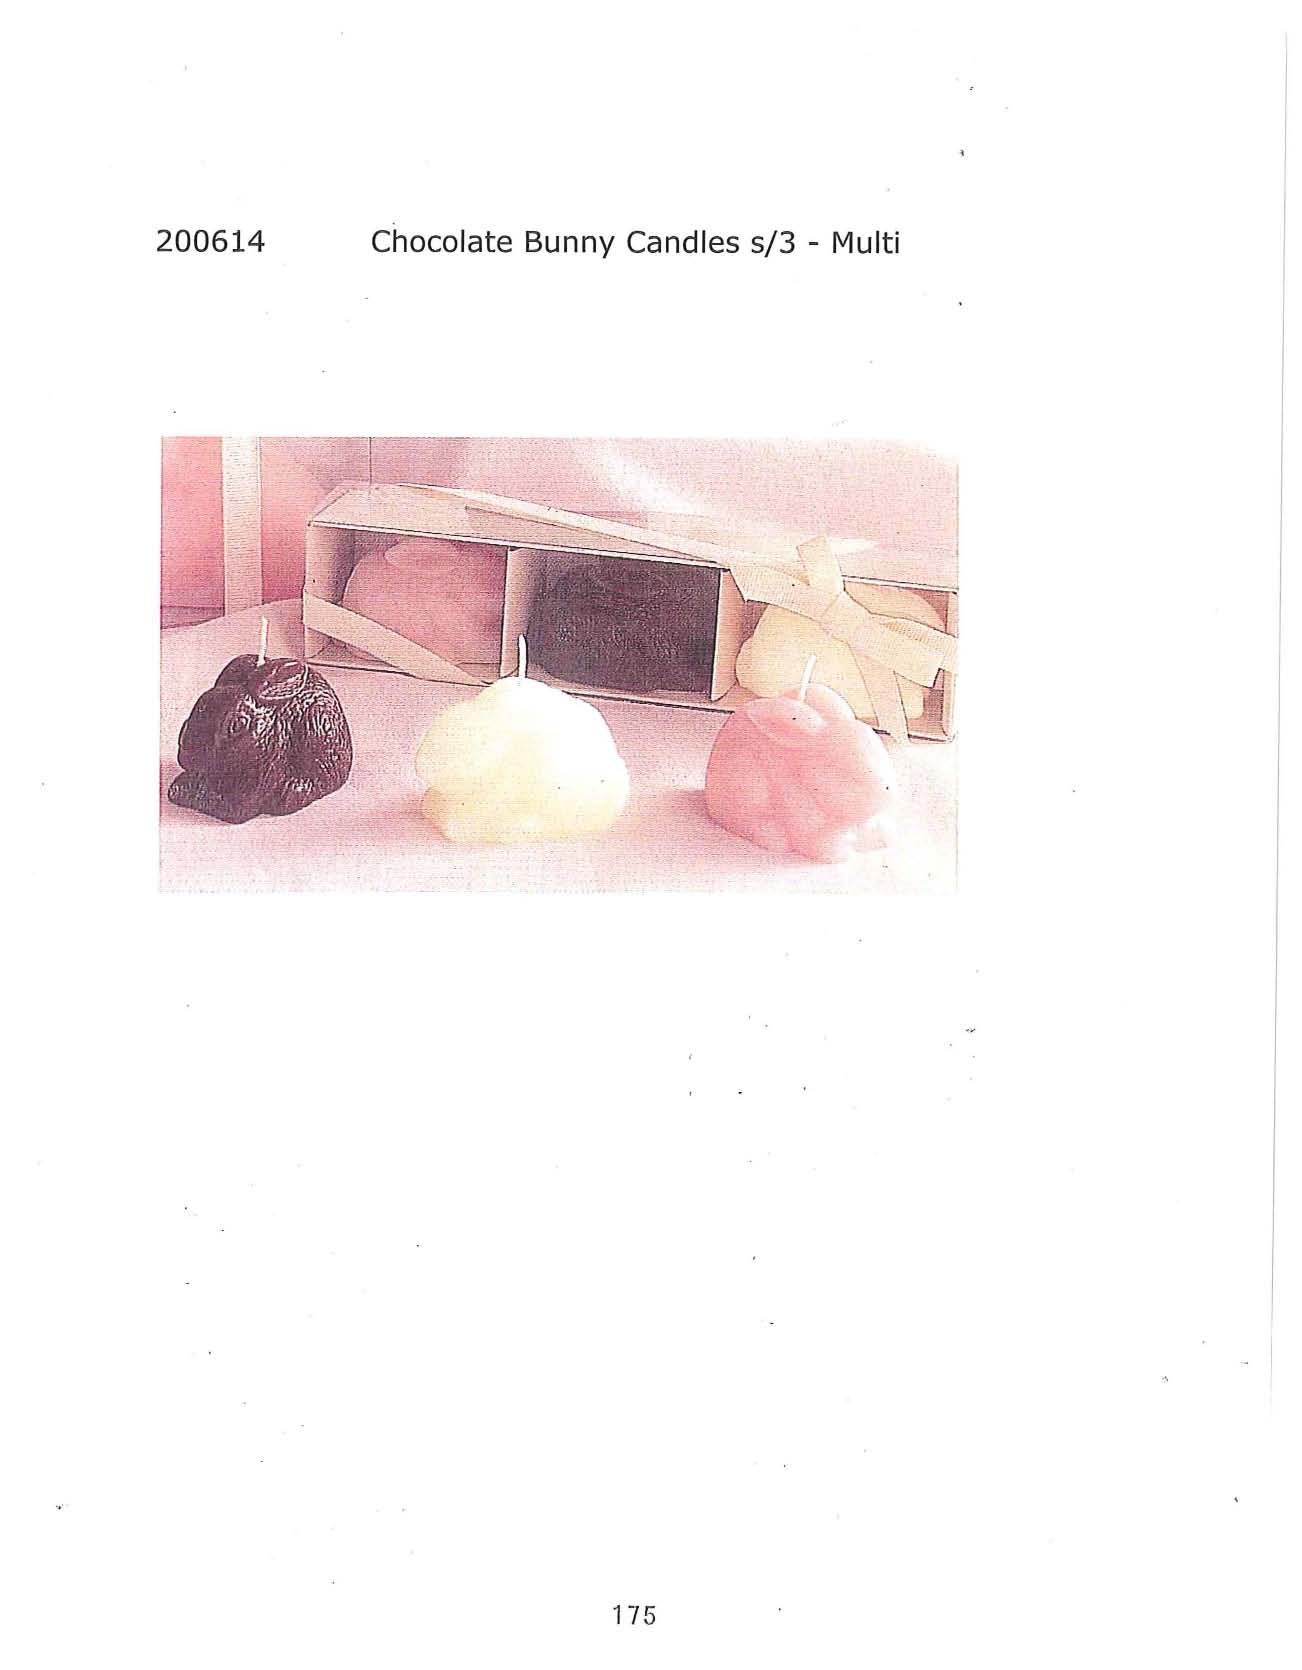 Chocolate Bunny Candle s/3 - Multi